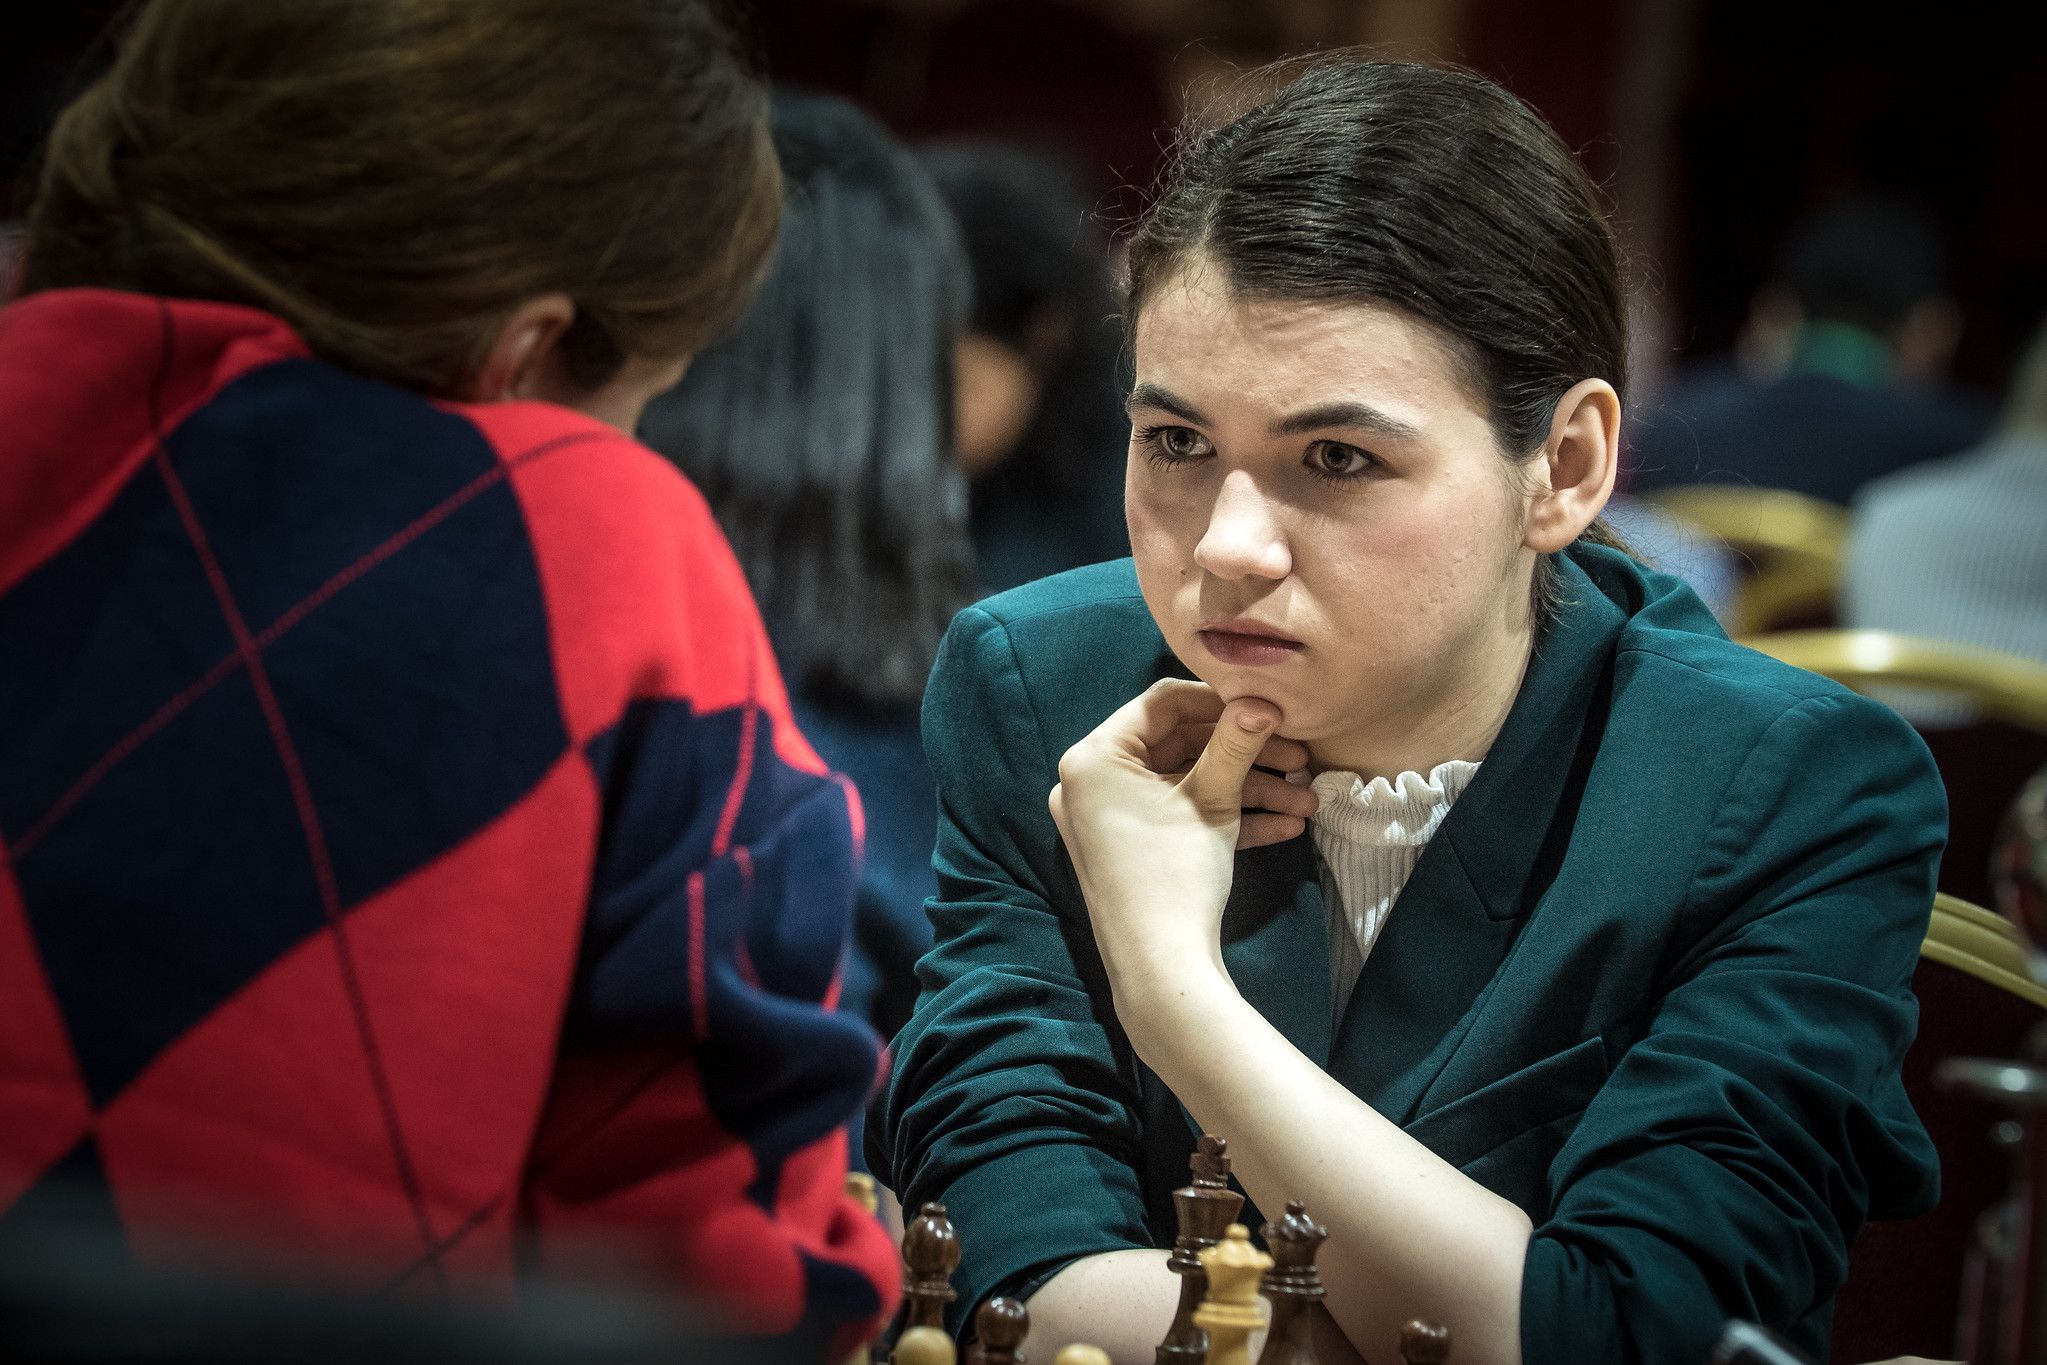 European Chess Union on X: FIDE Grand Swiss 2023 and FIDE Women's Grand  Swiss 2023 kicked off yesterday in Isle of Man with the first round!  #FIDEGrandSwiss The event gathers 114 players